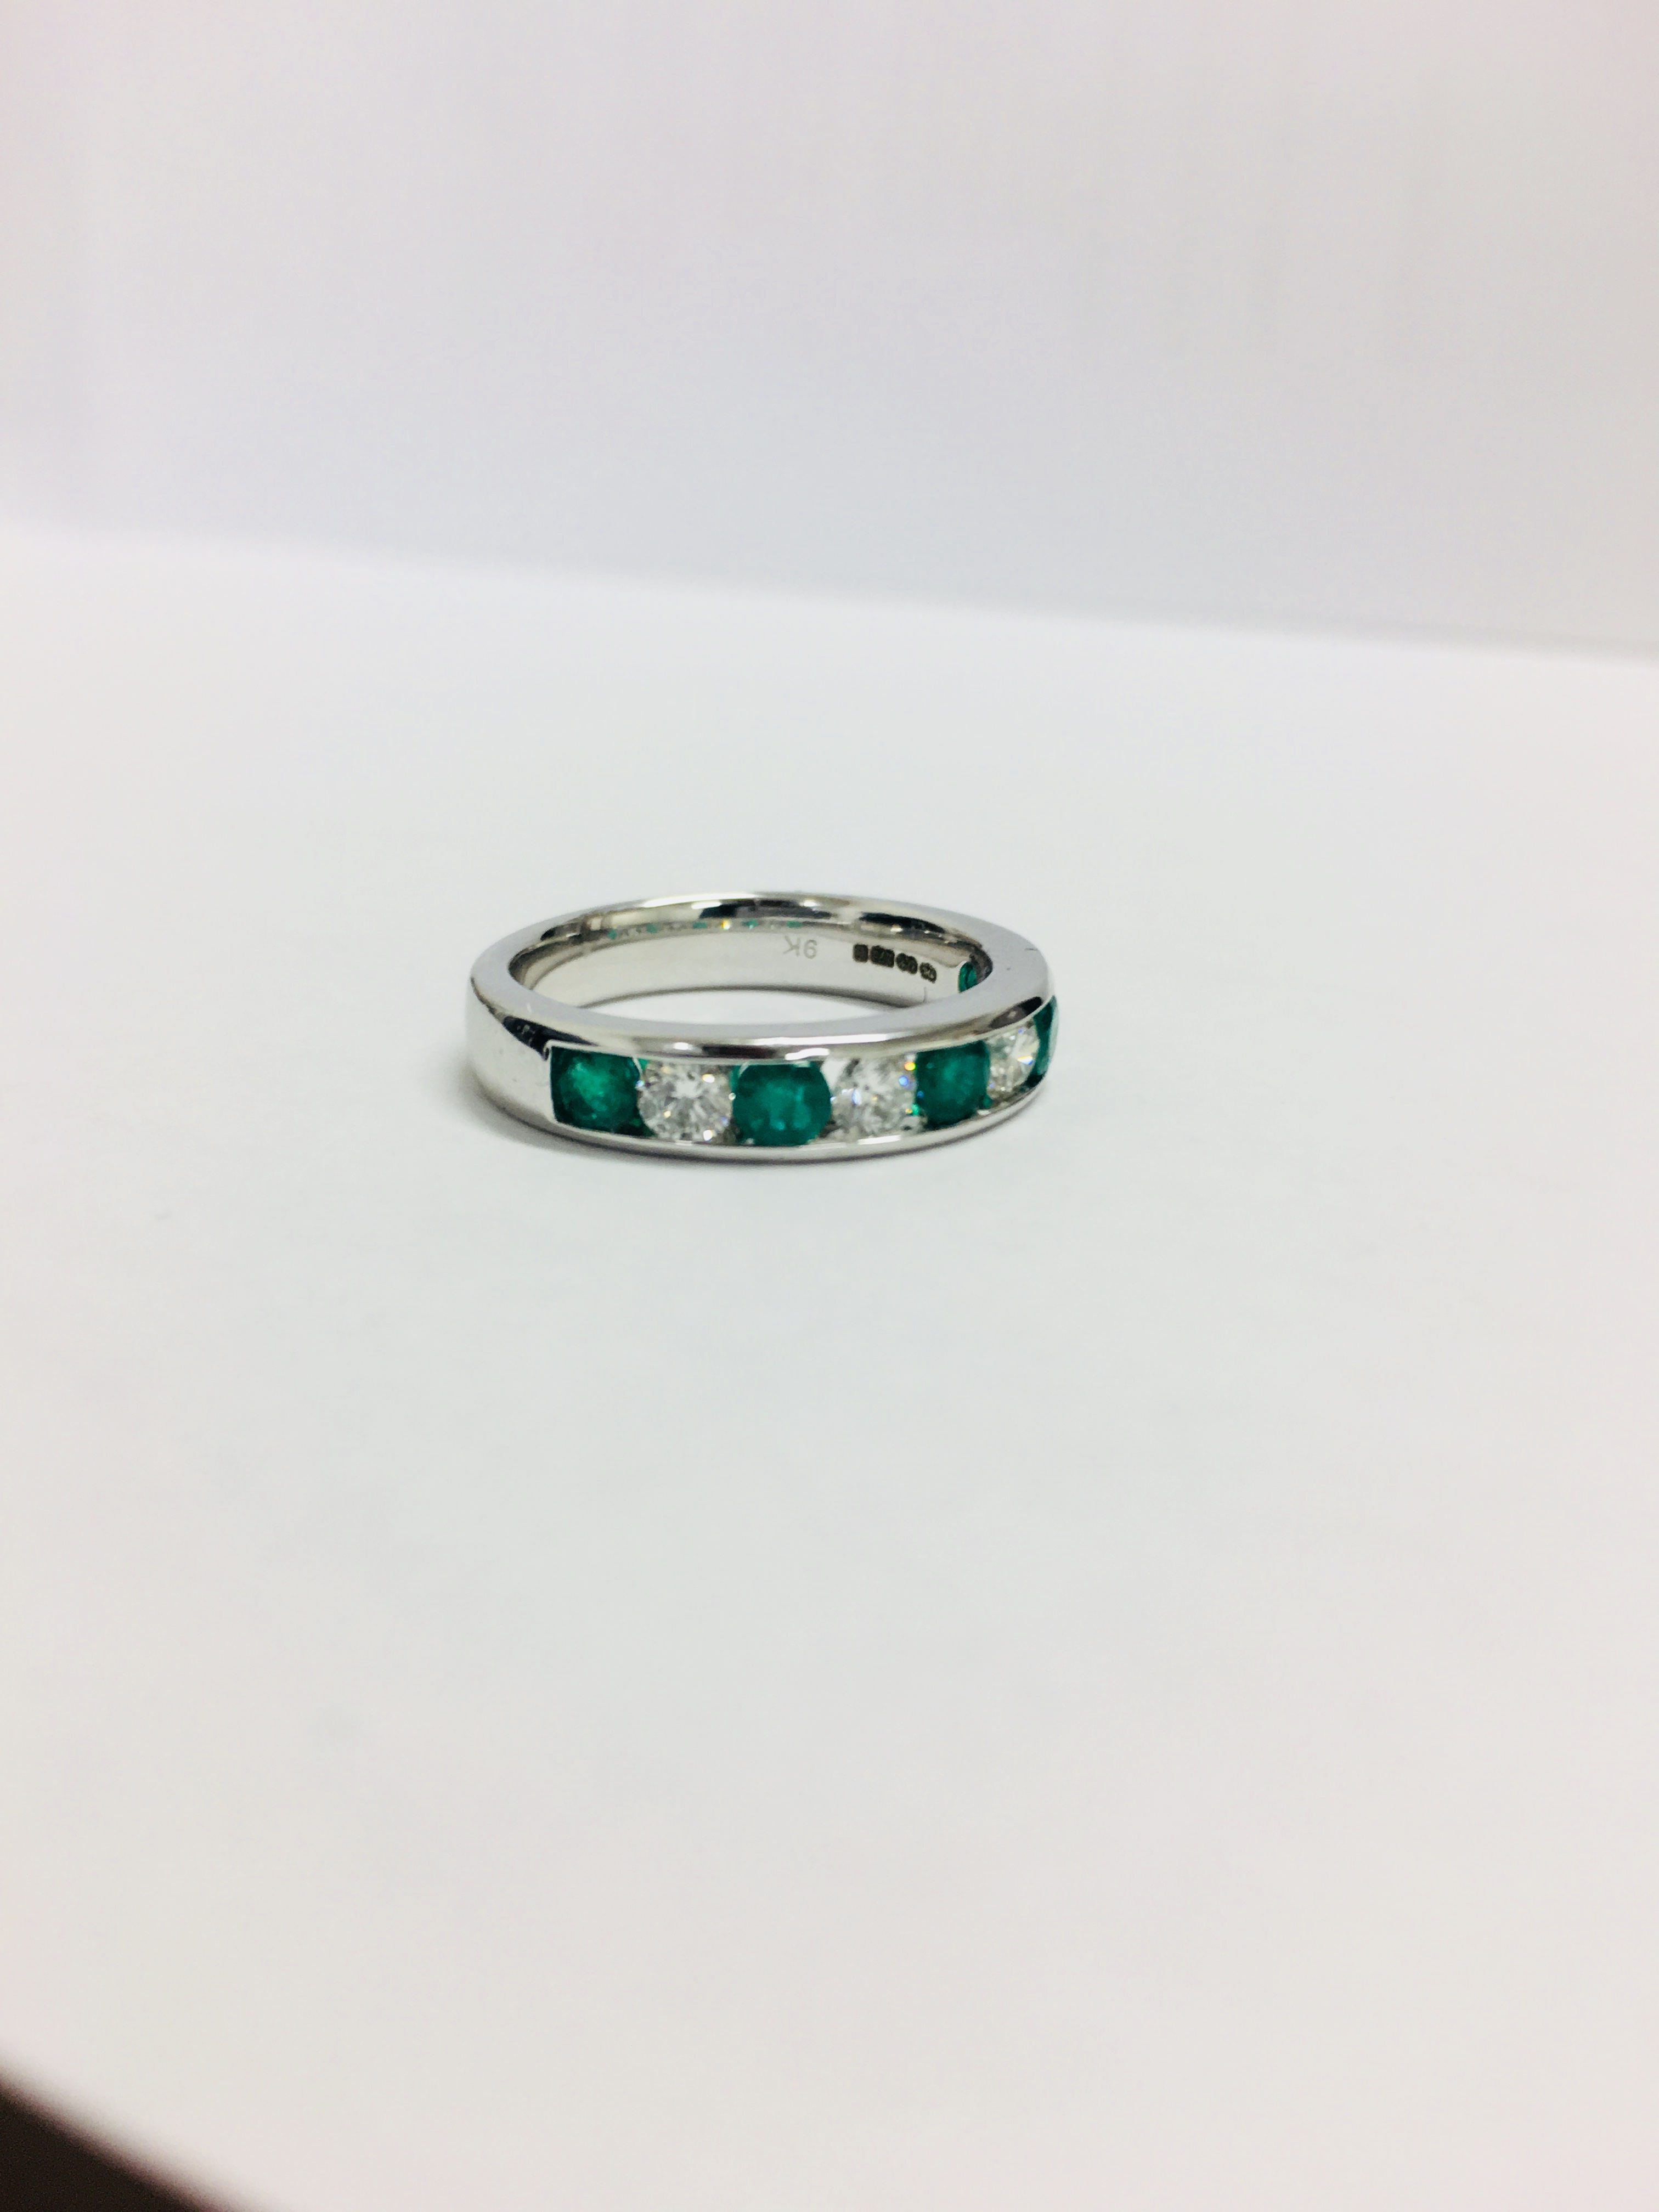 18Ct White Gold Emerald & Diamond Channel Set 9 Stone Ring, - Image 10 of 15